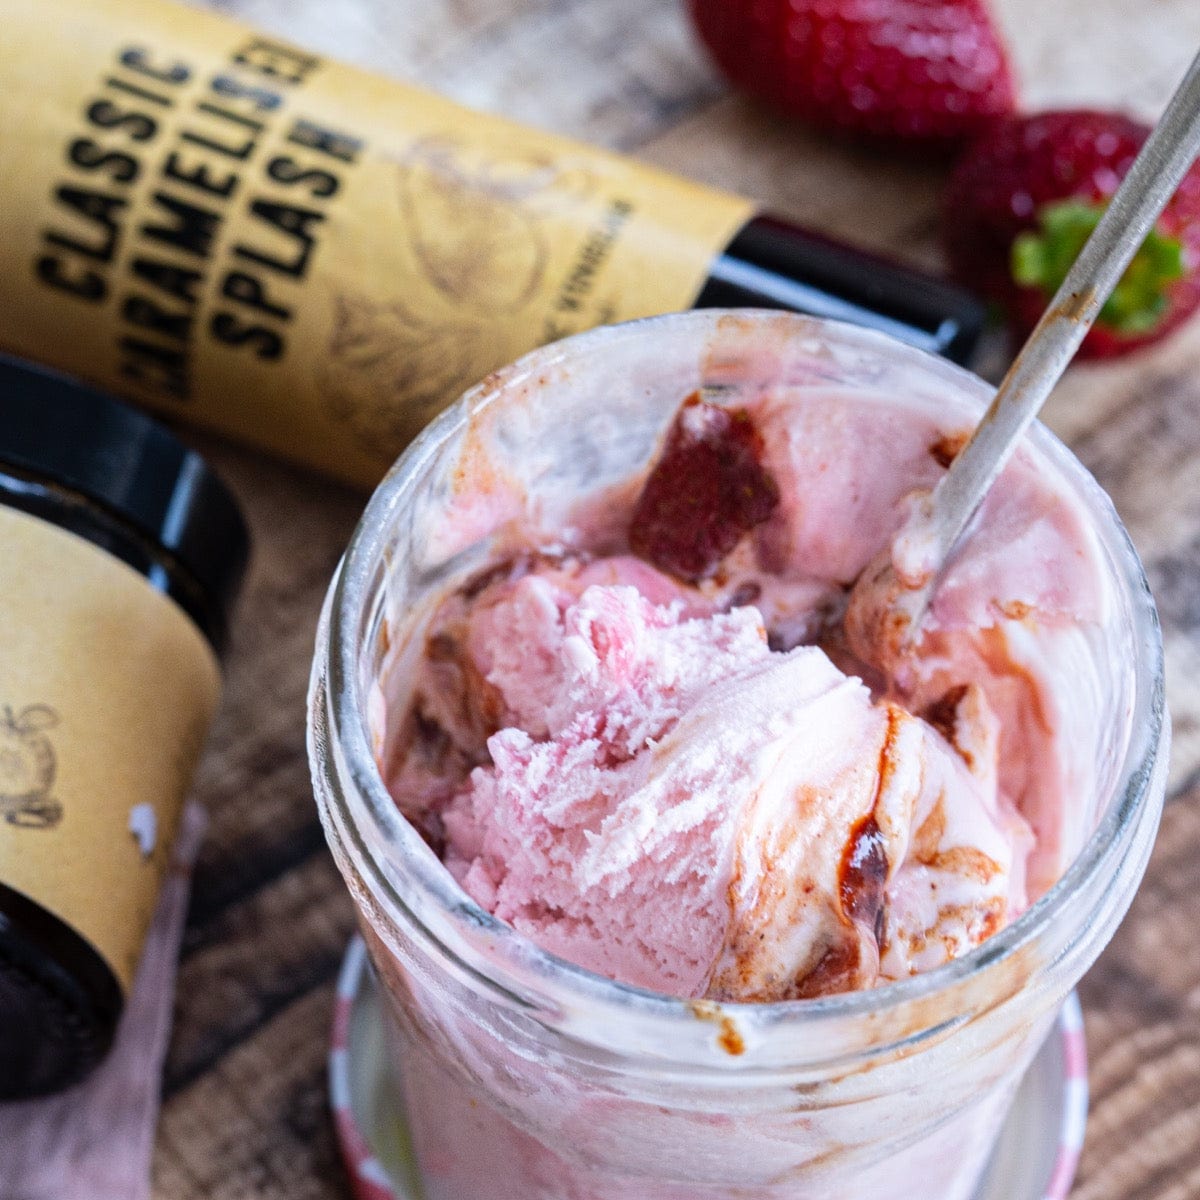 Tweed Real Food The Collective Gift Hamper Strawberry Balsamic Ice Cream